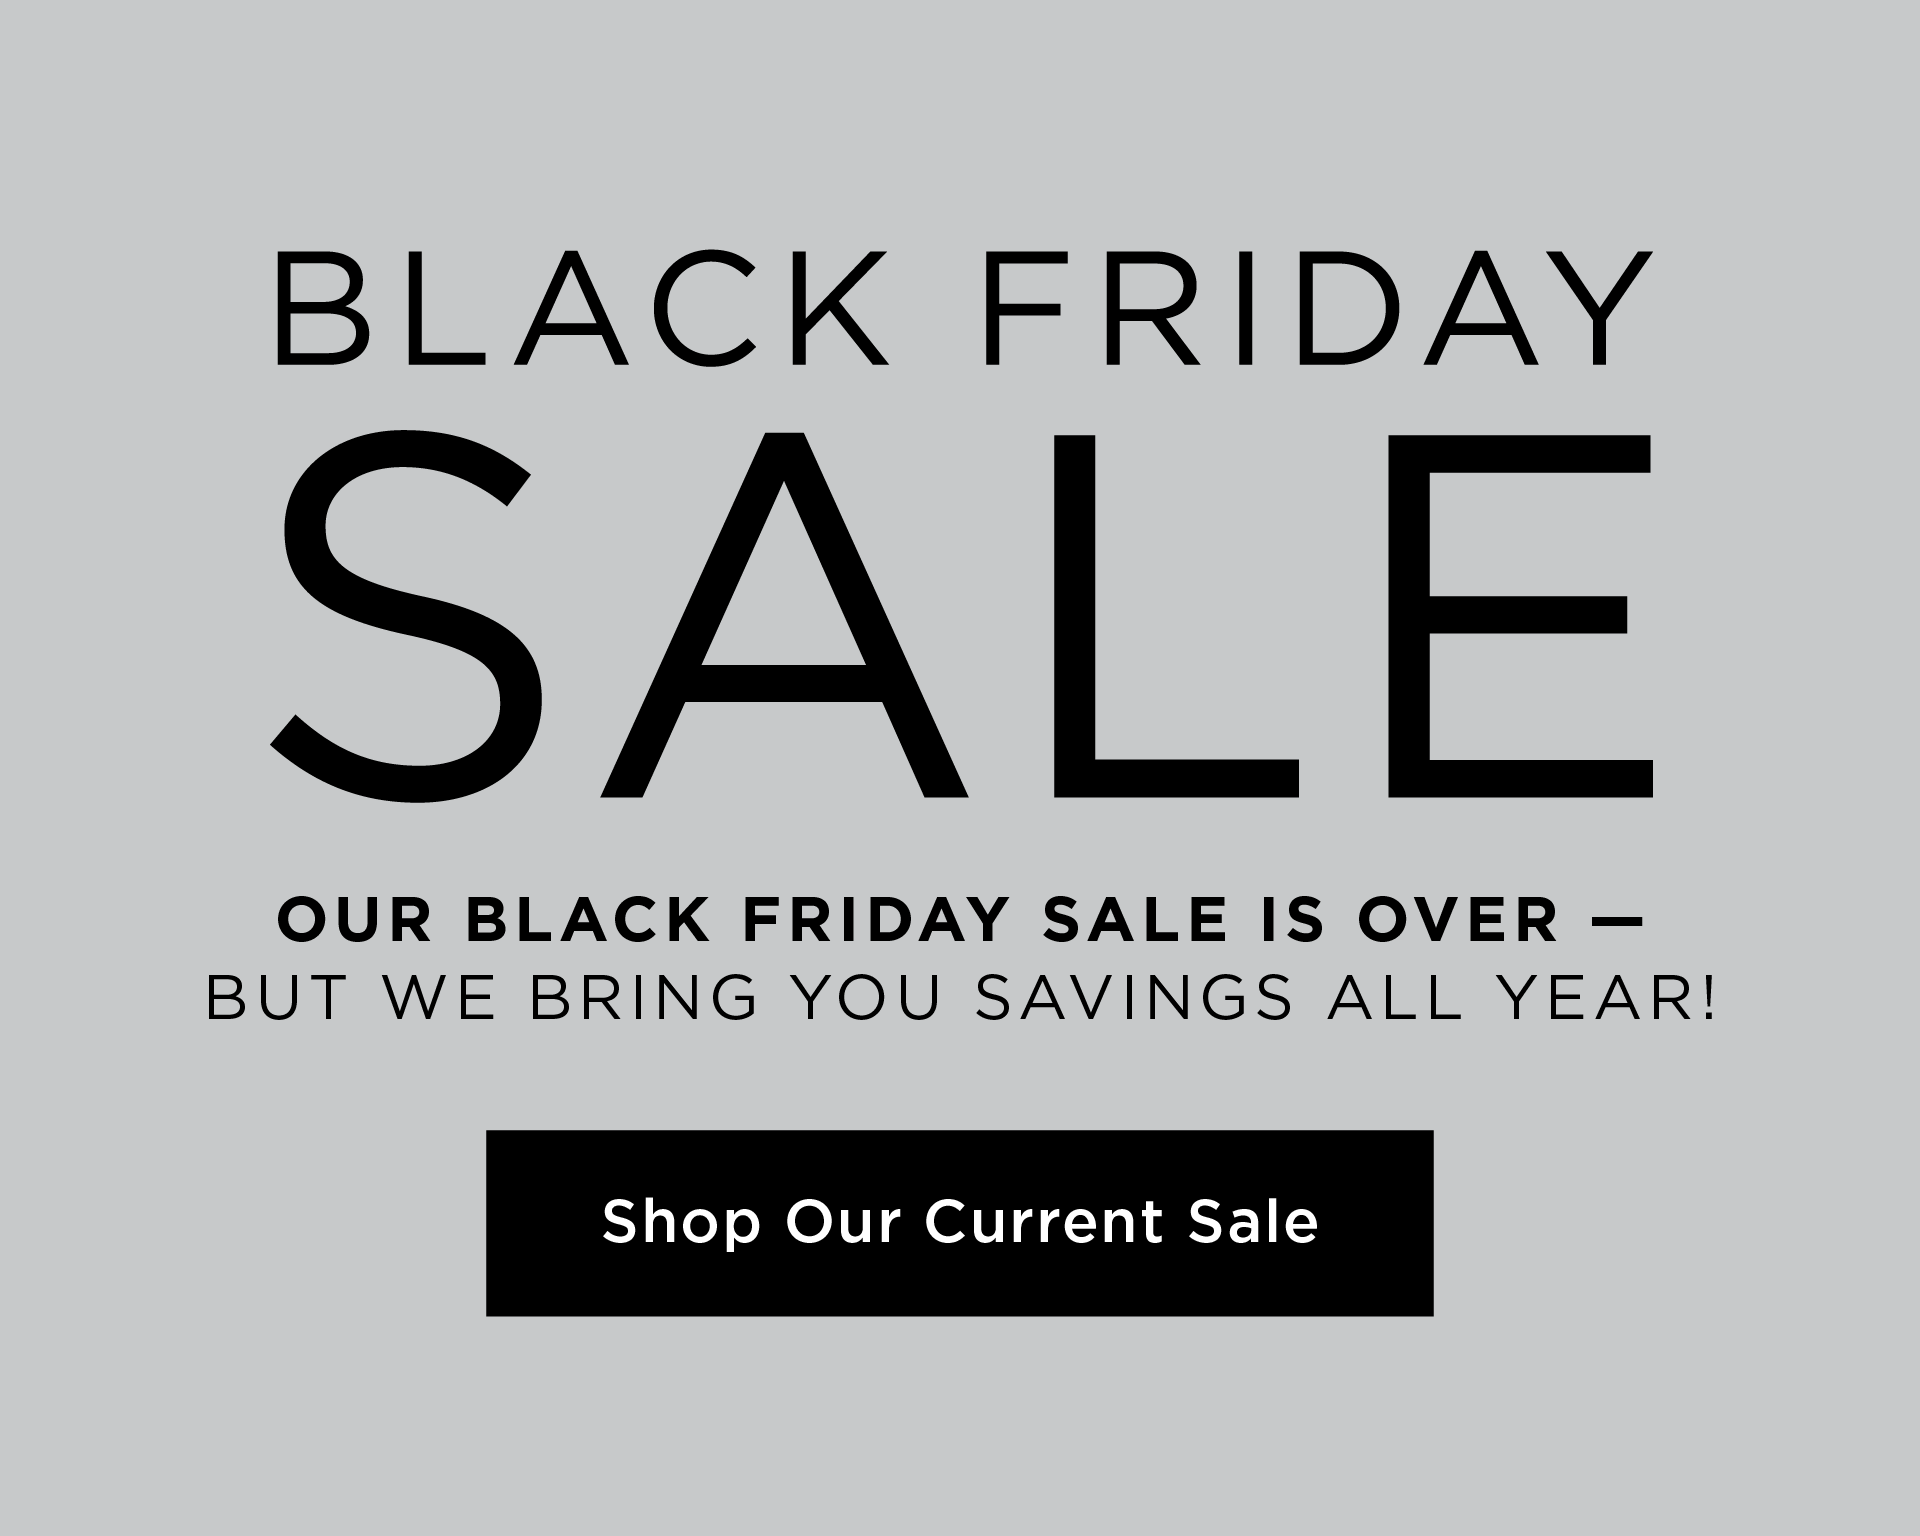 Black Friday SALE continues  Shop a further 30% off sale items